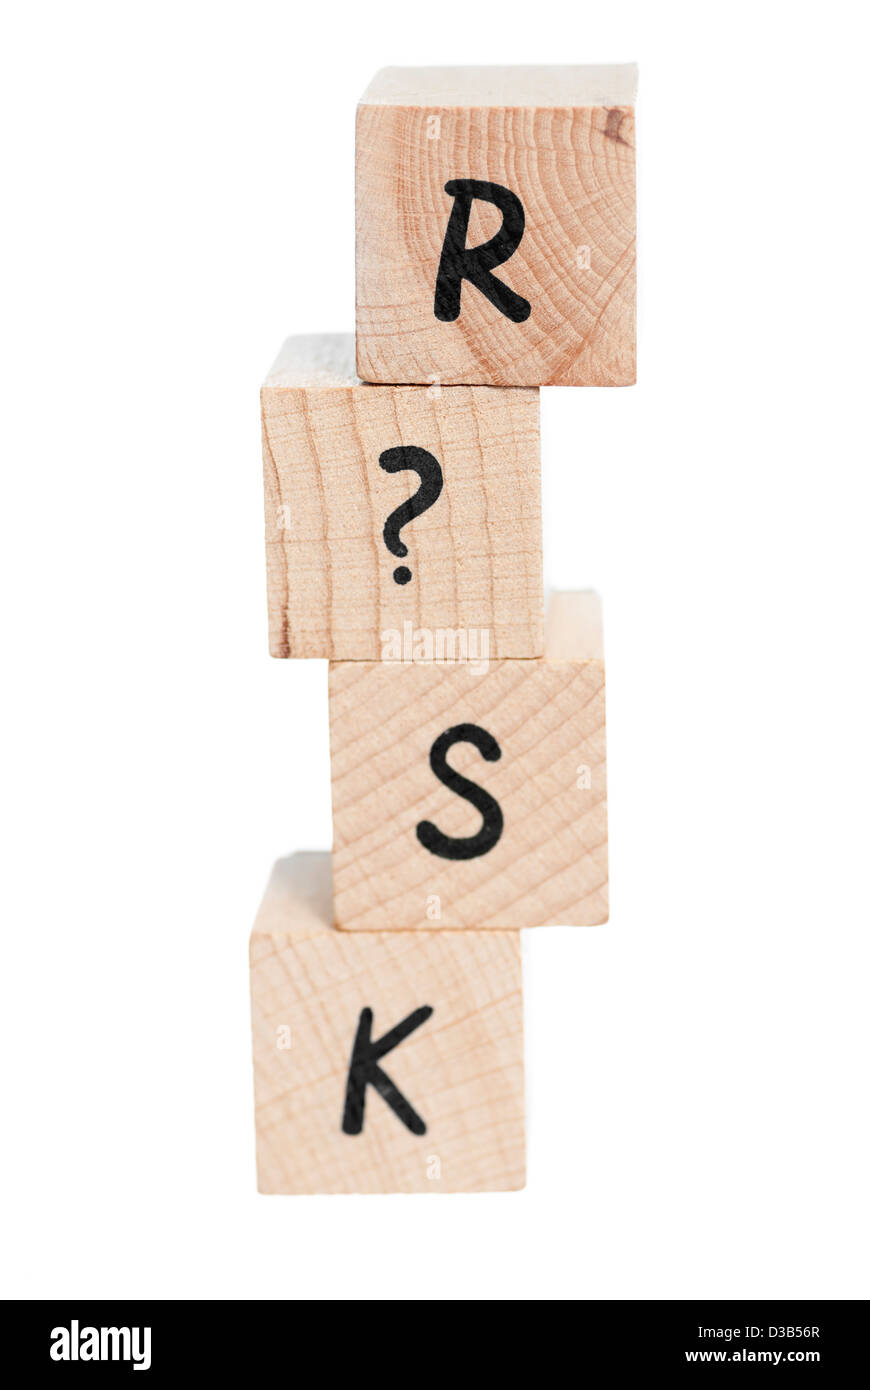 Risk spelt with a question mark. White background. Stock Photo